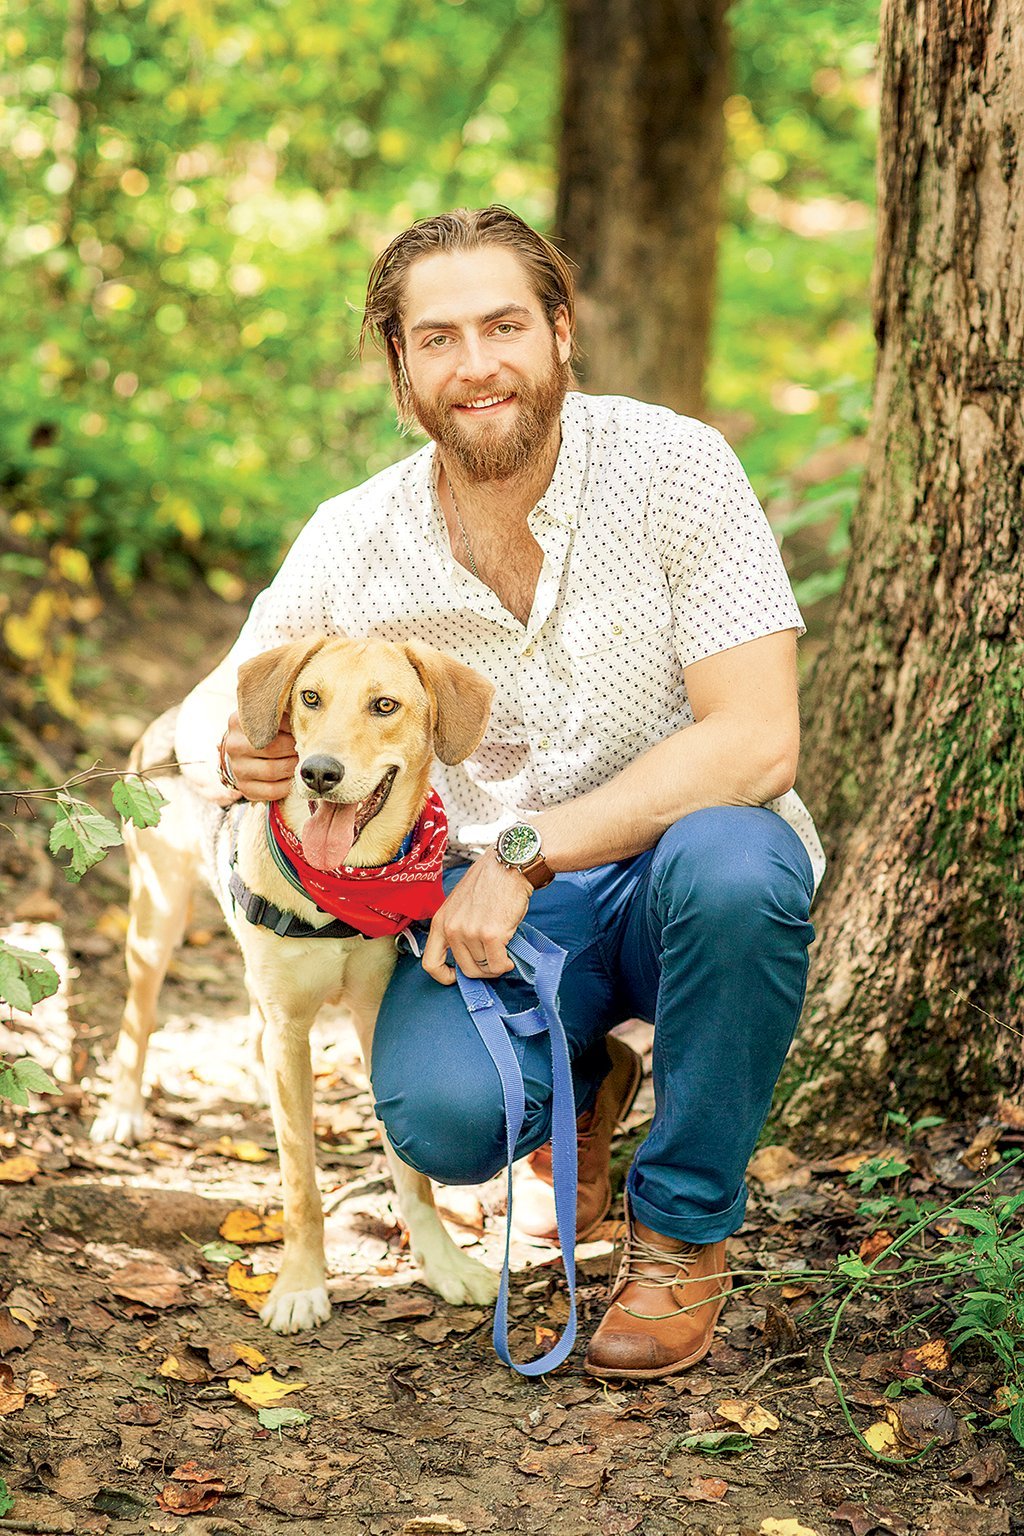 Braden Holtby Apparently Got Stuck at the Canadian Border Because of His Pet Tortoises